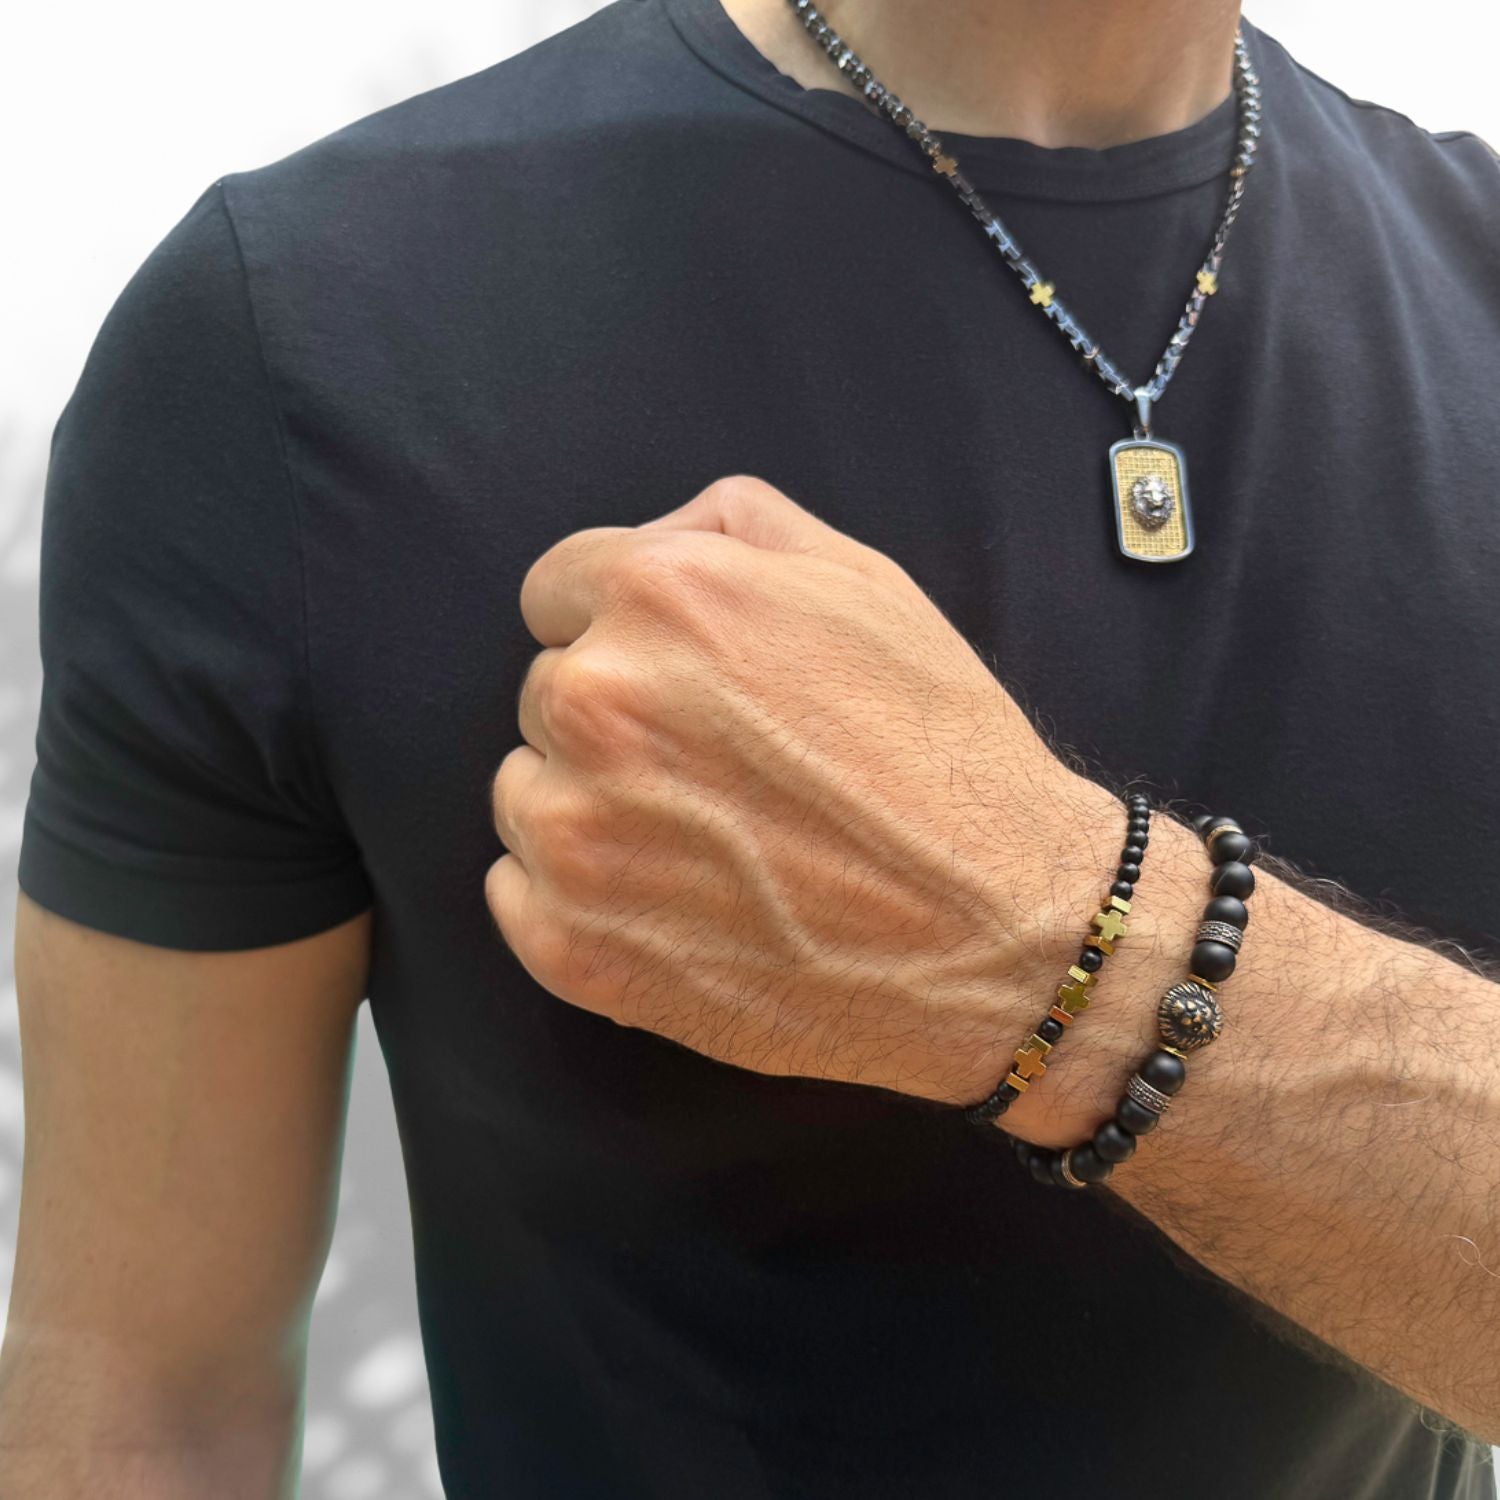 Men's Black Onyx Bead Bracelet with bronze spacers and a powerful lion charm symbolizing courage and leadership